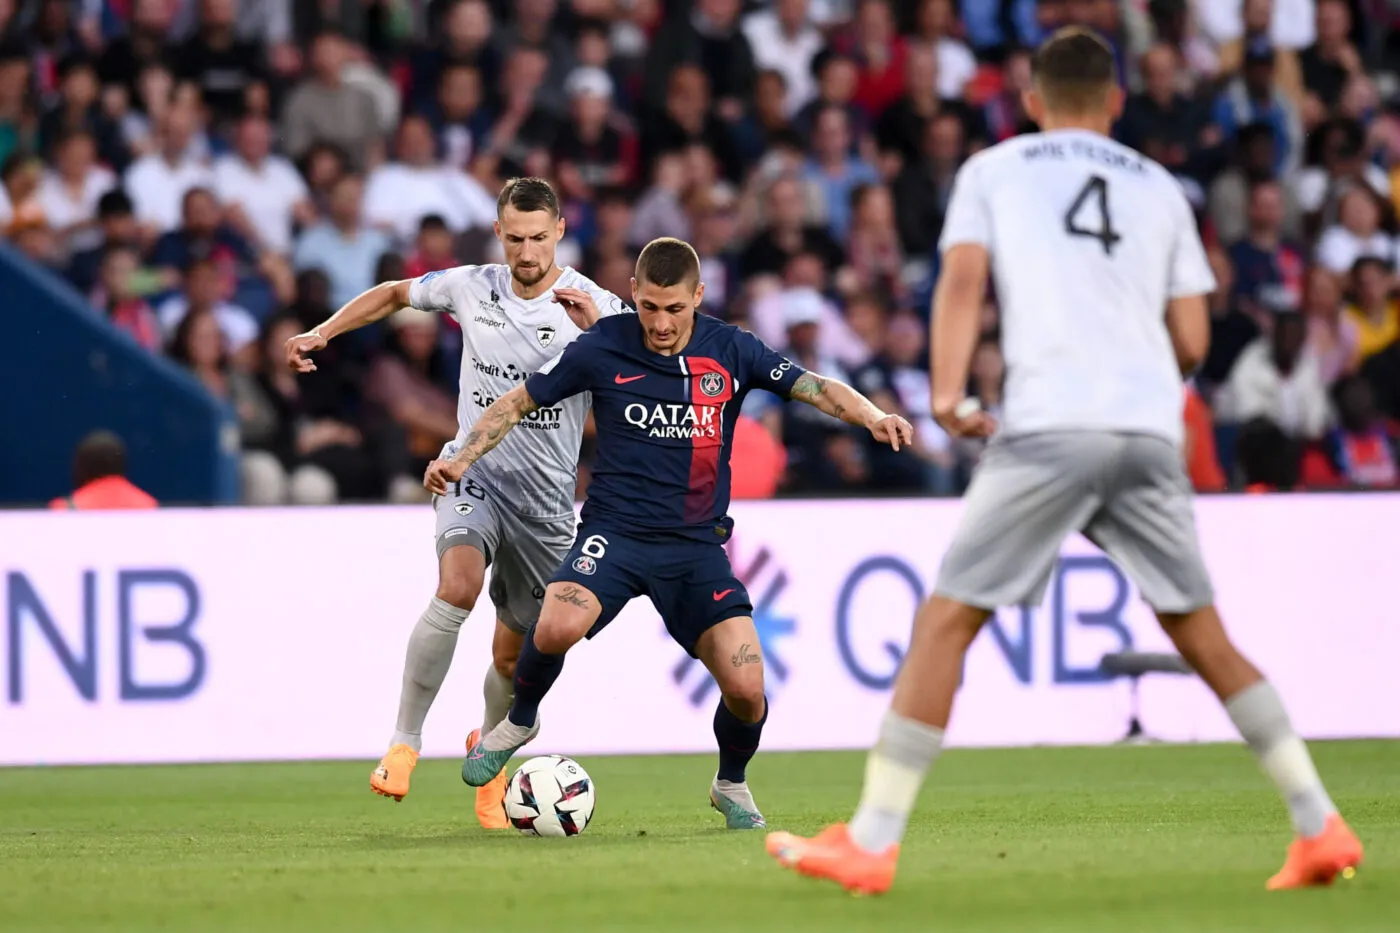 18 Elbasan RASHANI (cf63) - 06 Marco VERRATTI (psg) during the Ligue 1 Uber Eats match between PSG and Clermont Foot 63  at Parc des Princes on June 3, 2023 in Paris, France. (Photo by  Philippe Lecoeur/FEP/Icon Sport)